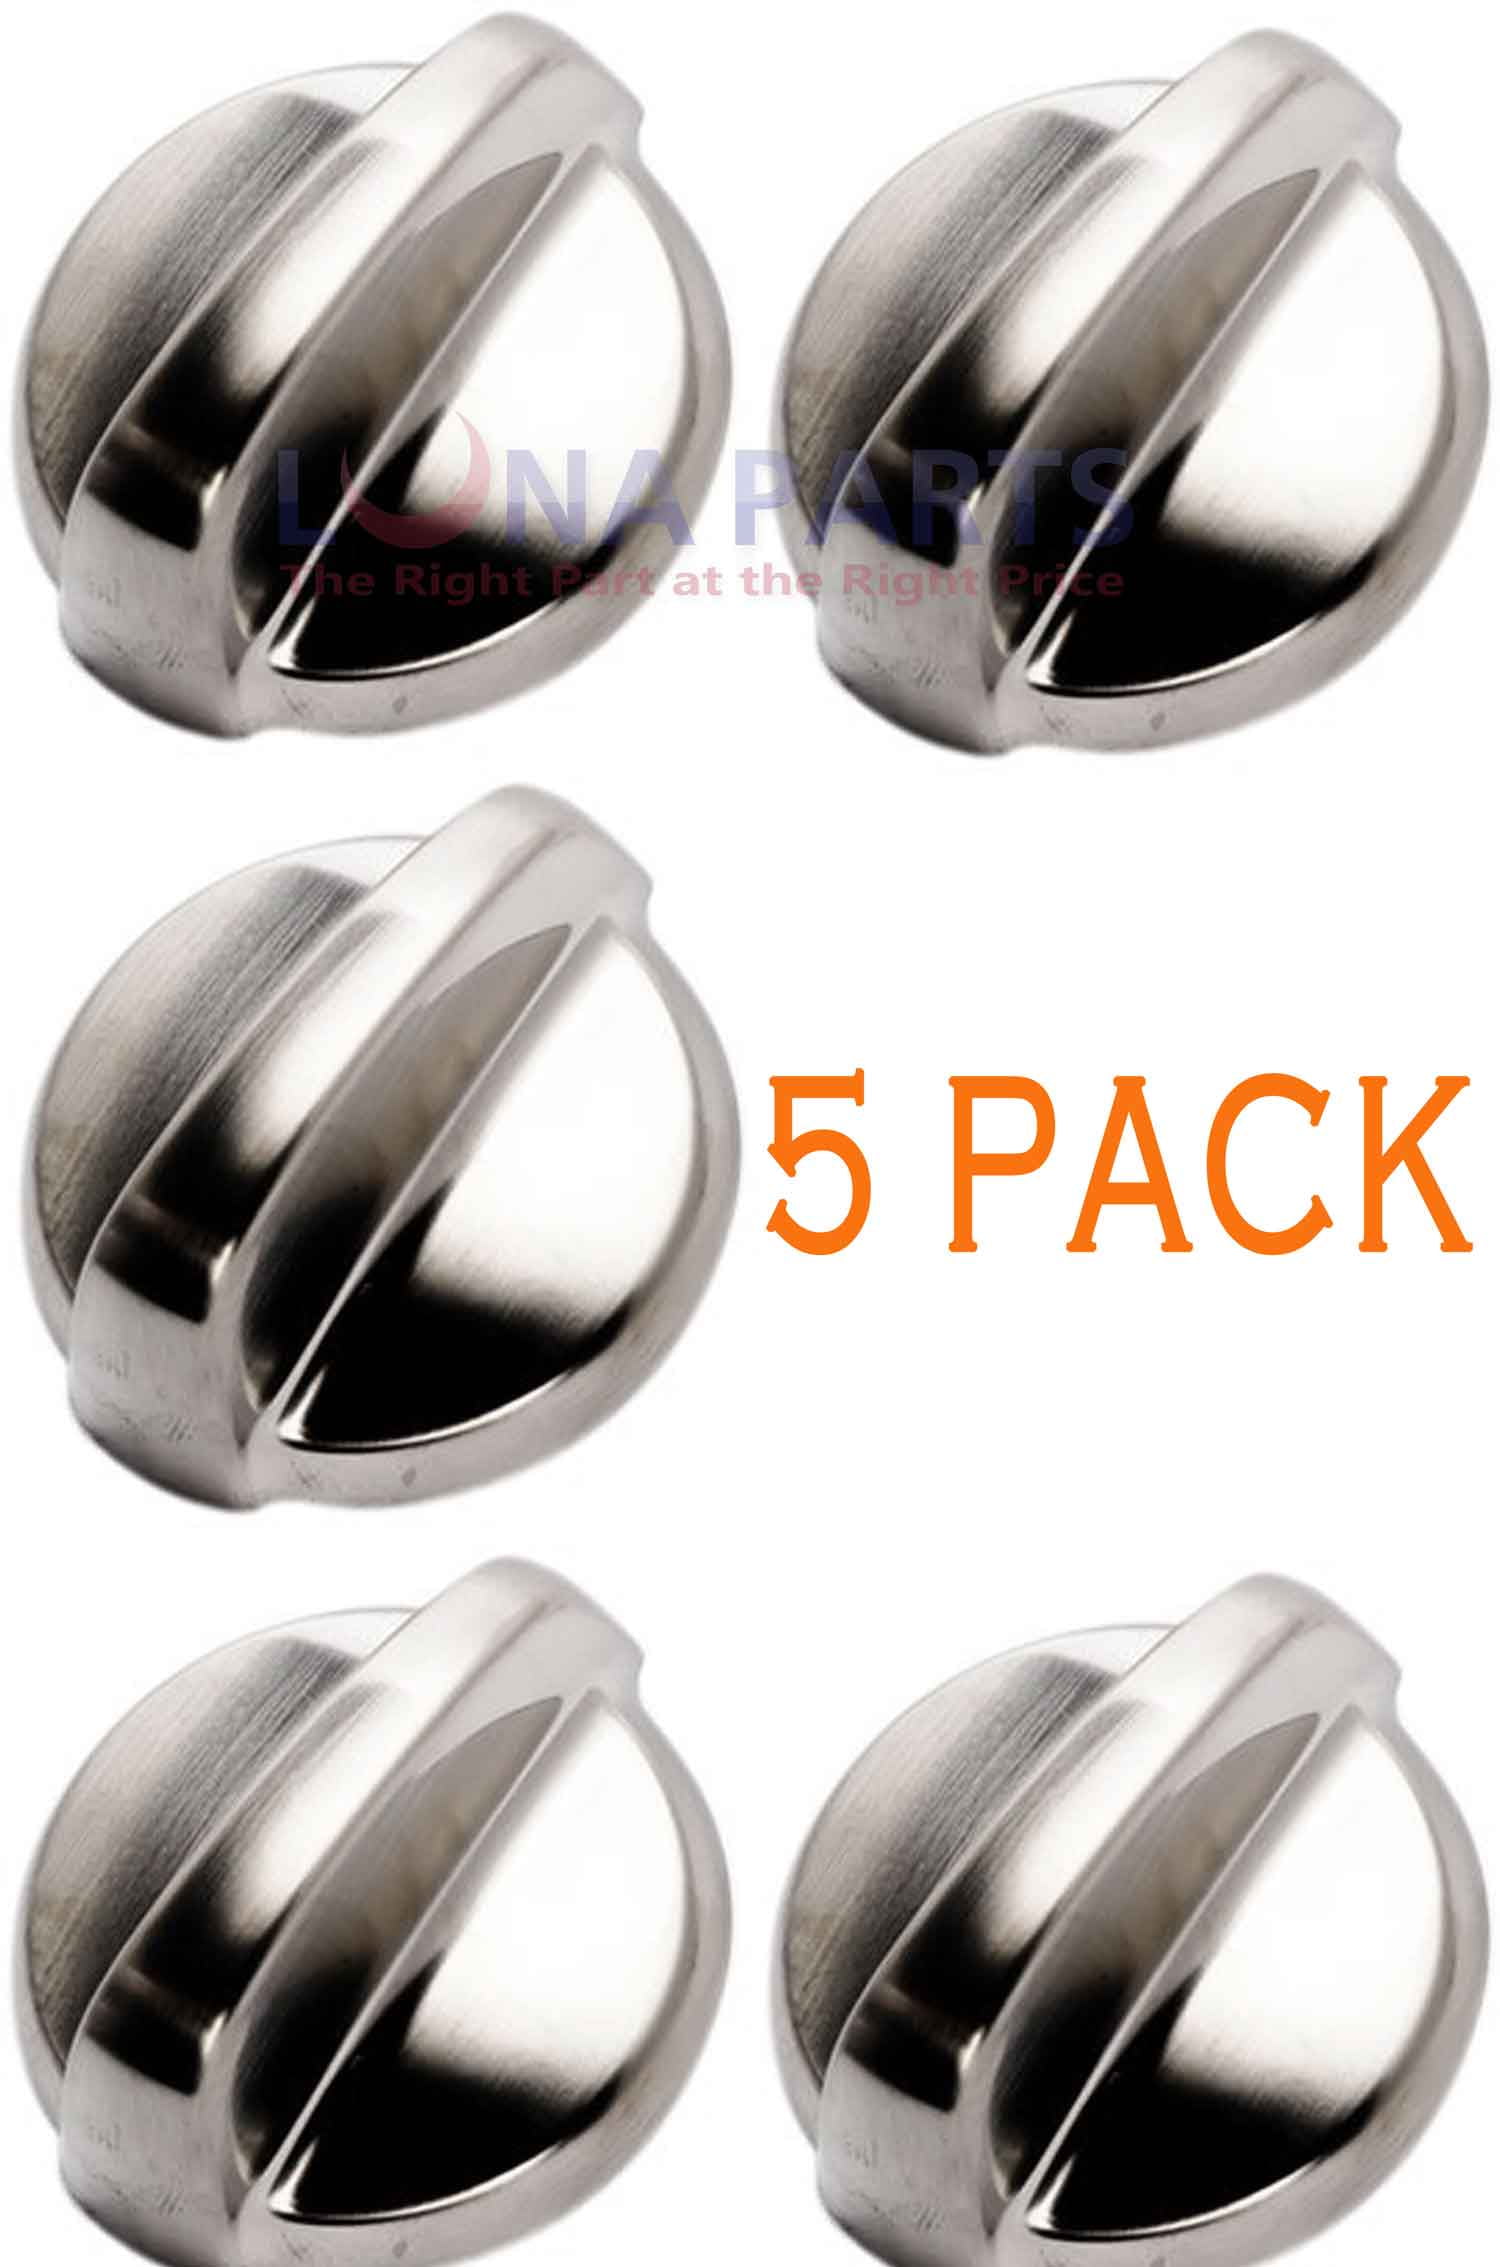 GE WB03T10284 Surface Burner Knob Stainless Steel Finish 4 PACK 